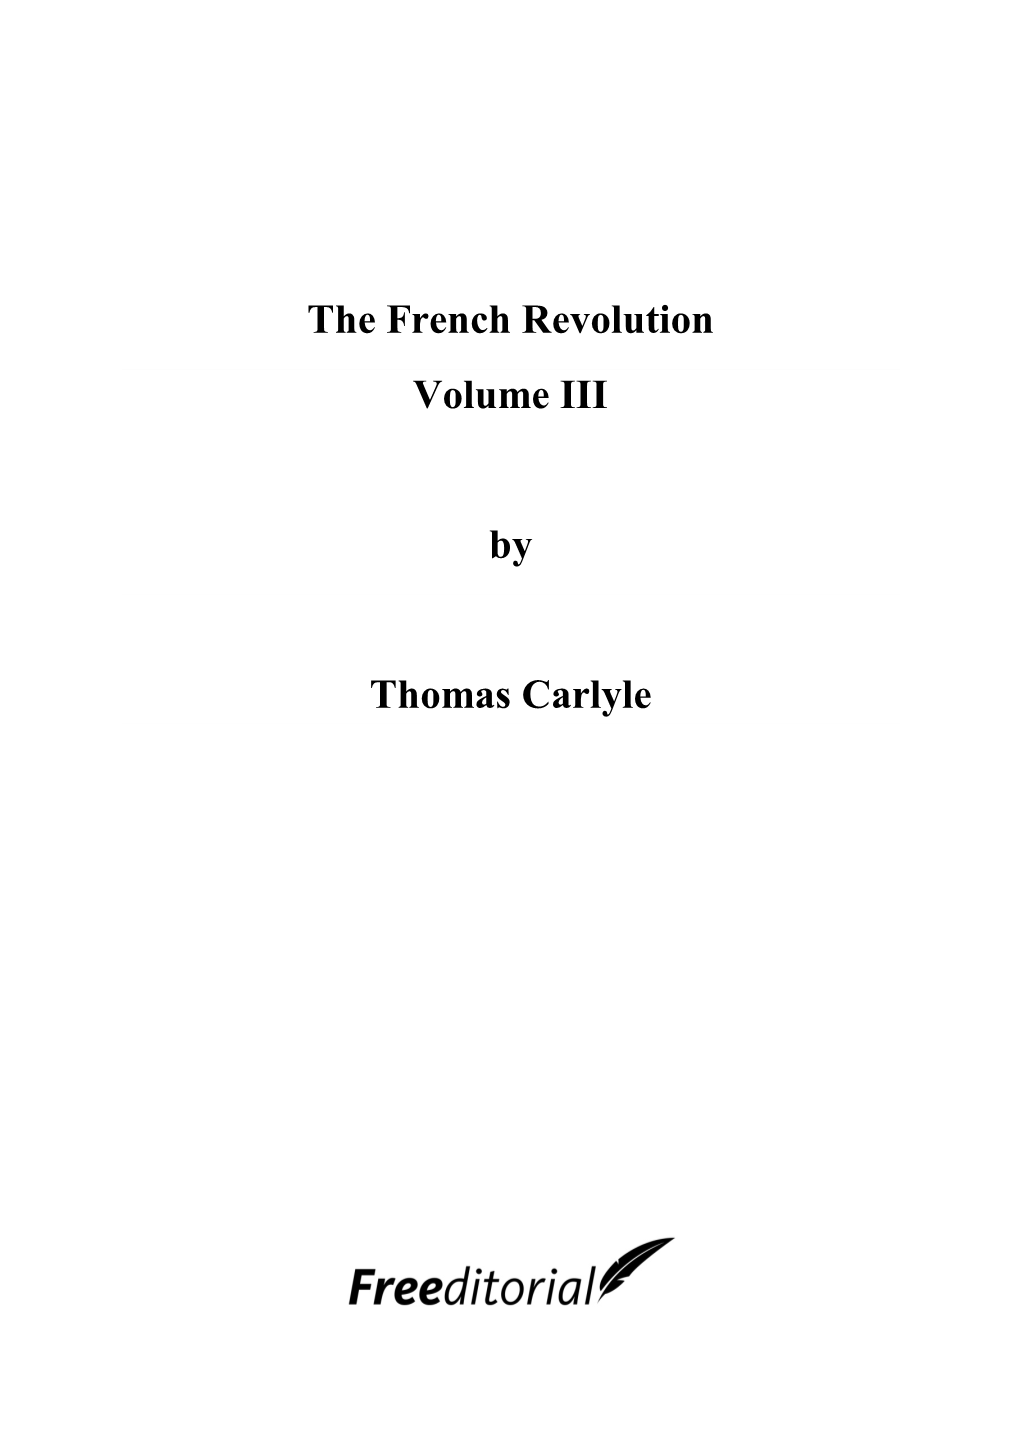 The French Revolution Volume III by Thomas Carlyle